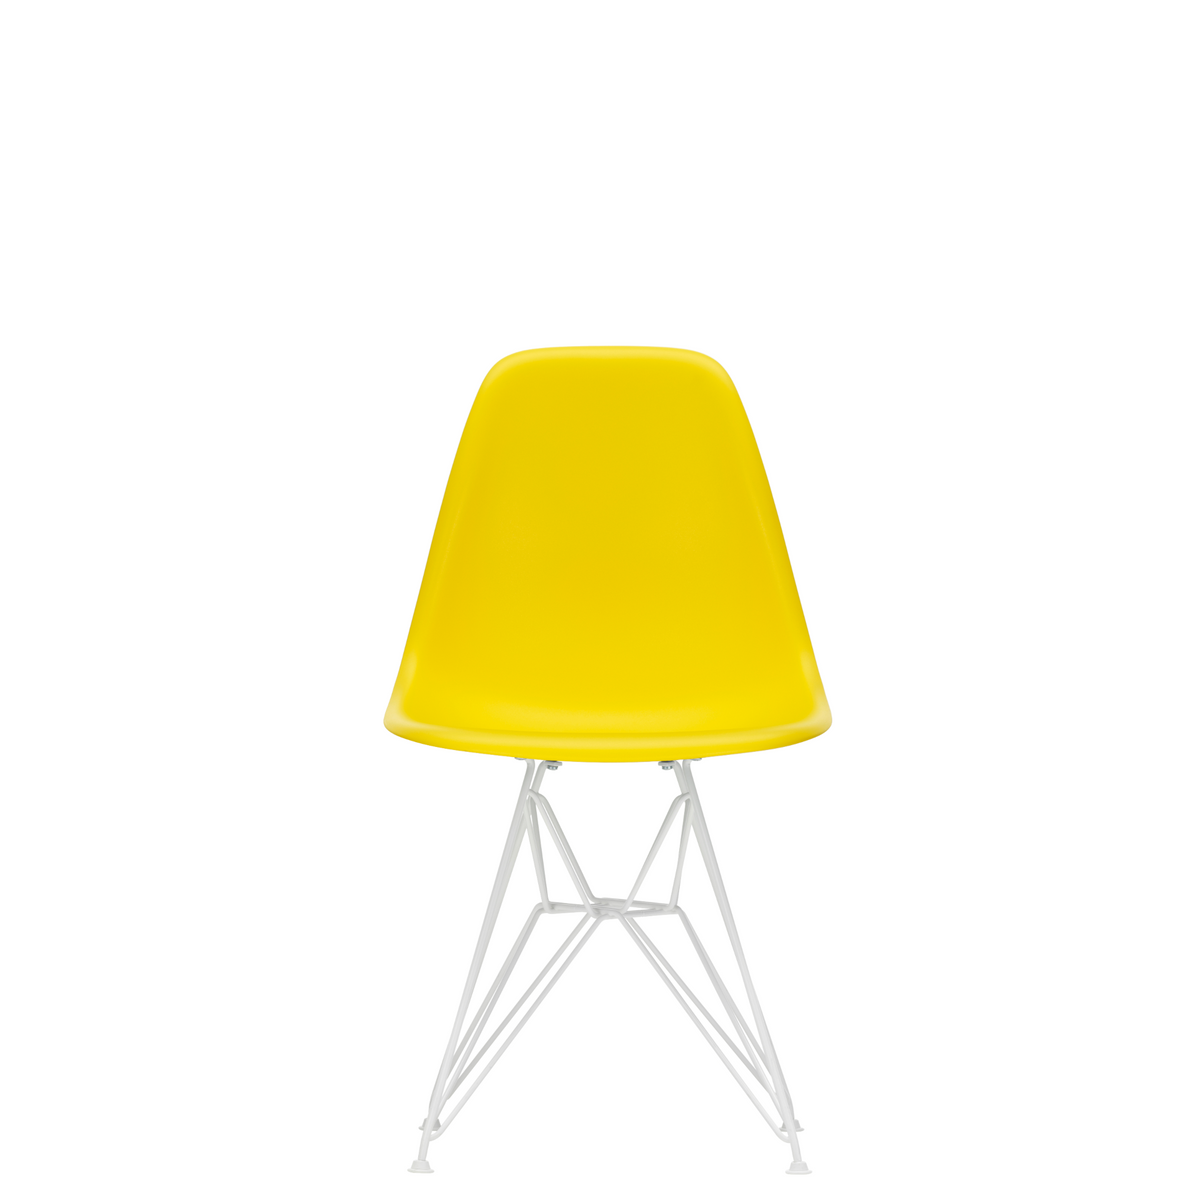 Vitra Eames Plastic Side Chair DSR Powder Coated for Outdoor Use Sunlight Yellow Shell White Powdercoated Base